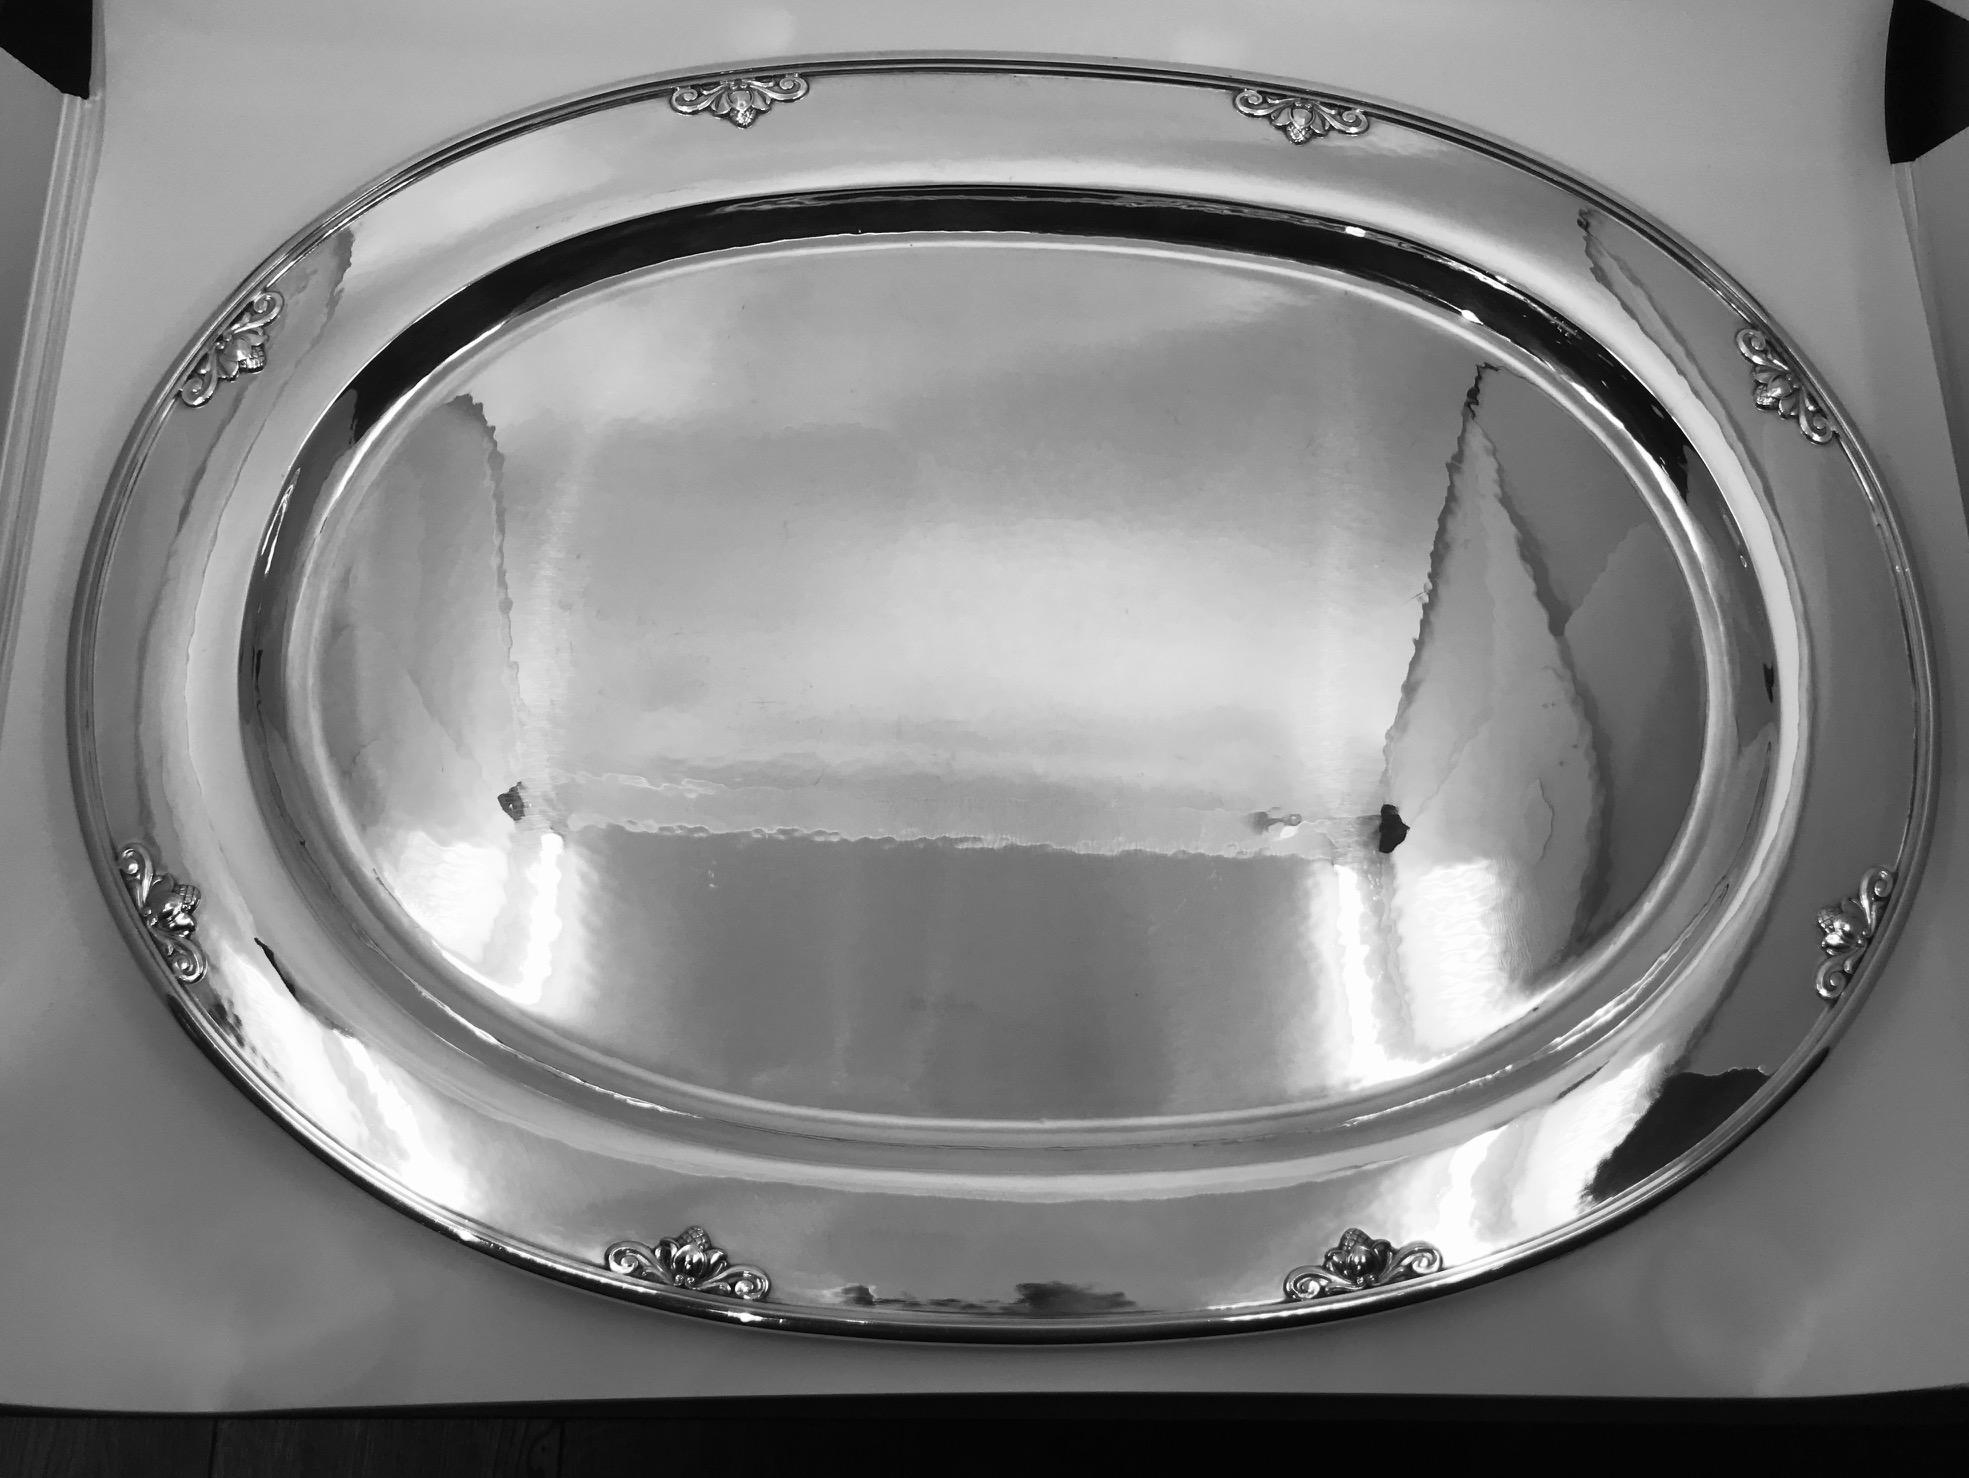 This is a large sterling silver Georg Jensen oval serving platter in the Acorn pattern, design #642H by Johan Rohde.

The Acorn flatware design is from 1915, this is one of the many serving pieces made to match.
Measures: 21 3/4? x 15 5/8? (37cm